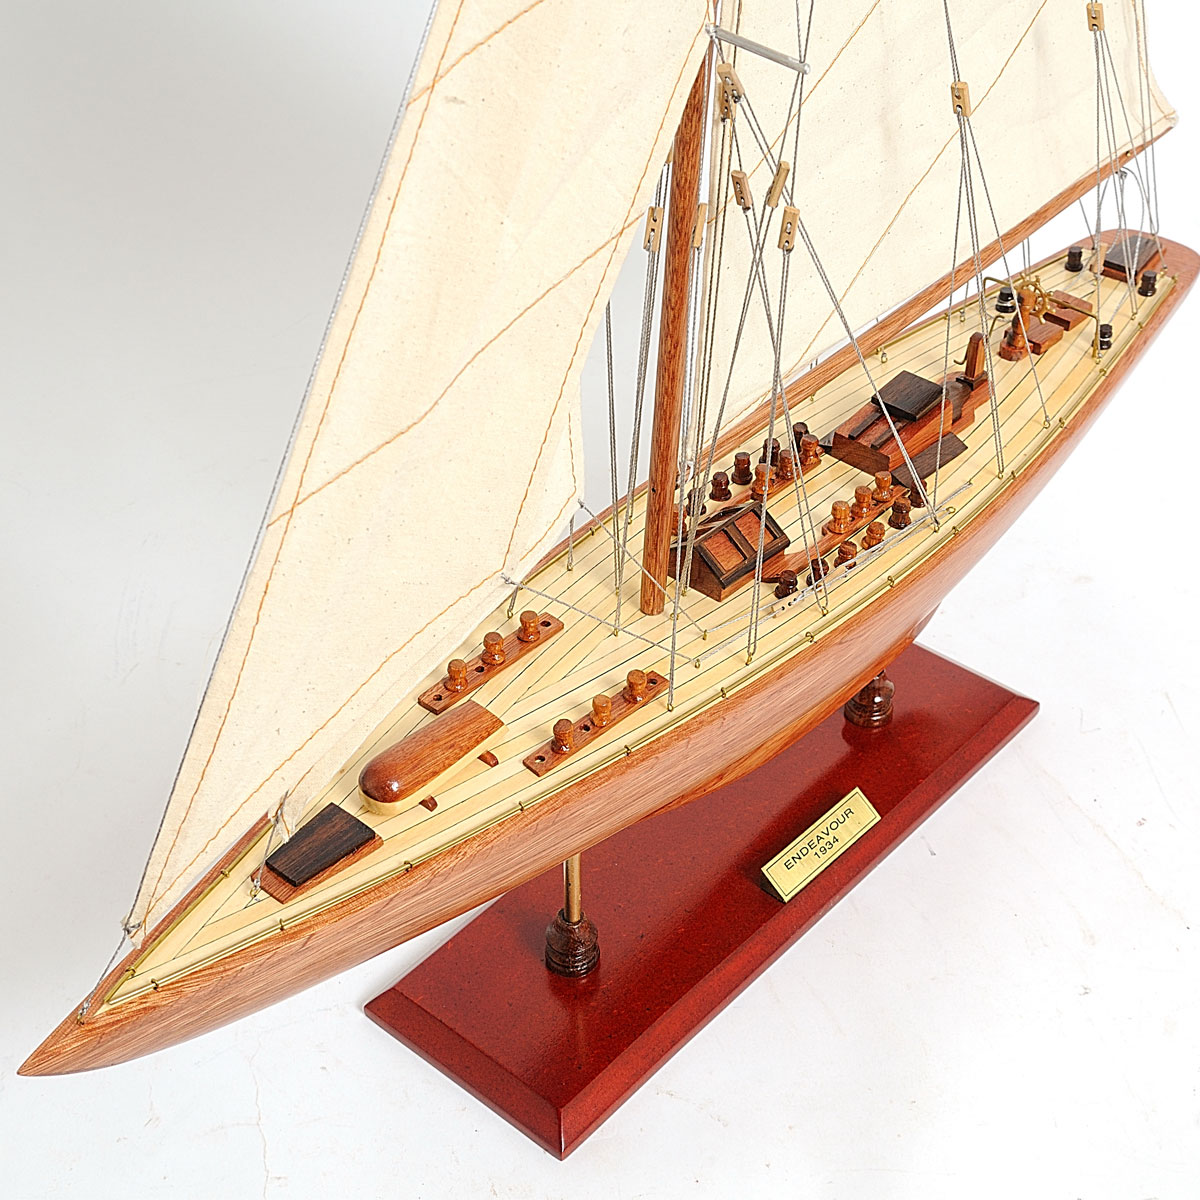 2 WOODEN SAIL SHIP 9 IN boats WOOD ships decor wind sails new model boat toy new 